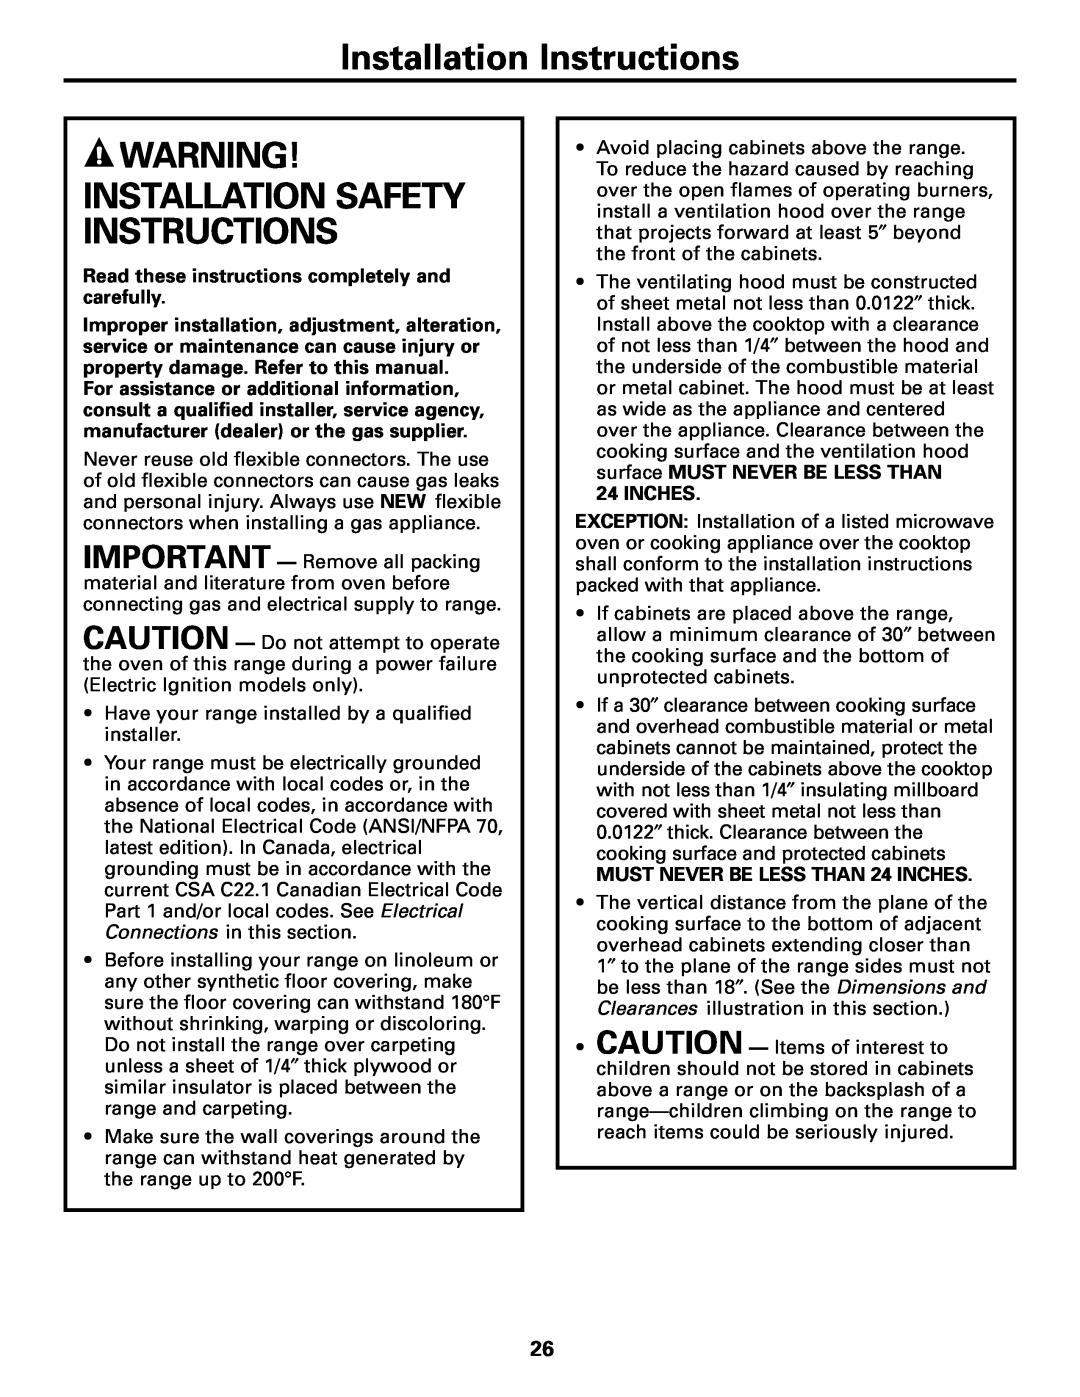 GE JGBC20 Installation Instructions, Installation Safety Instructions, Read these instructions completely and carefully 